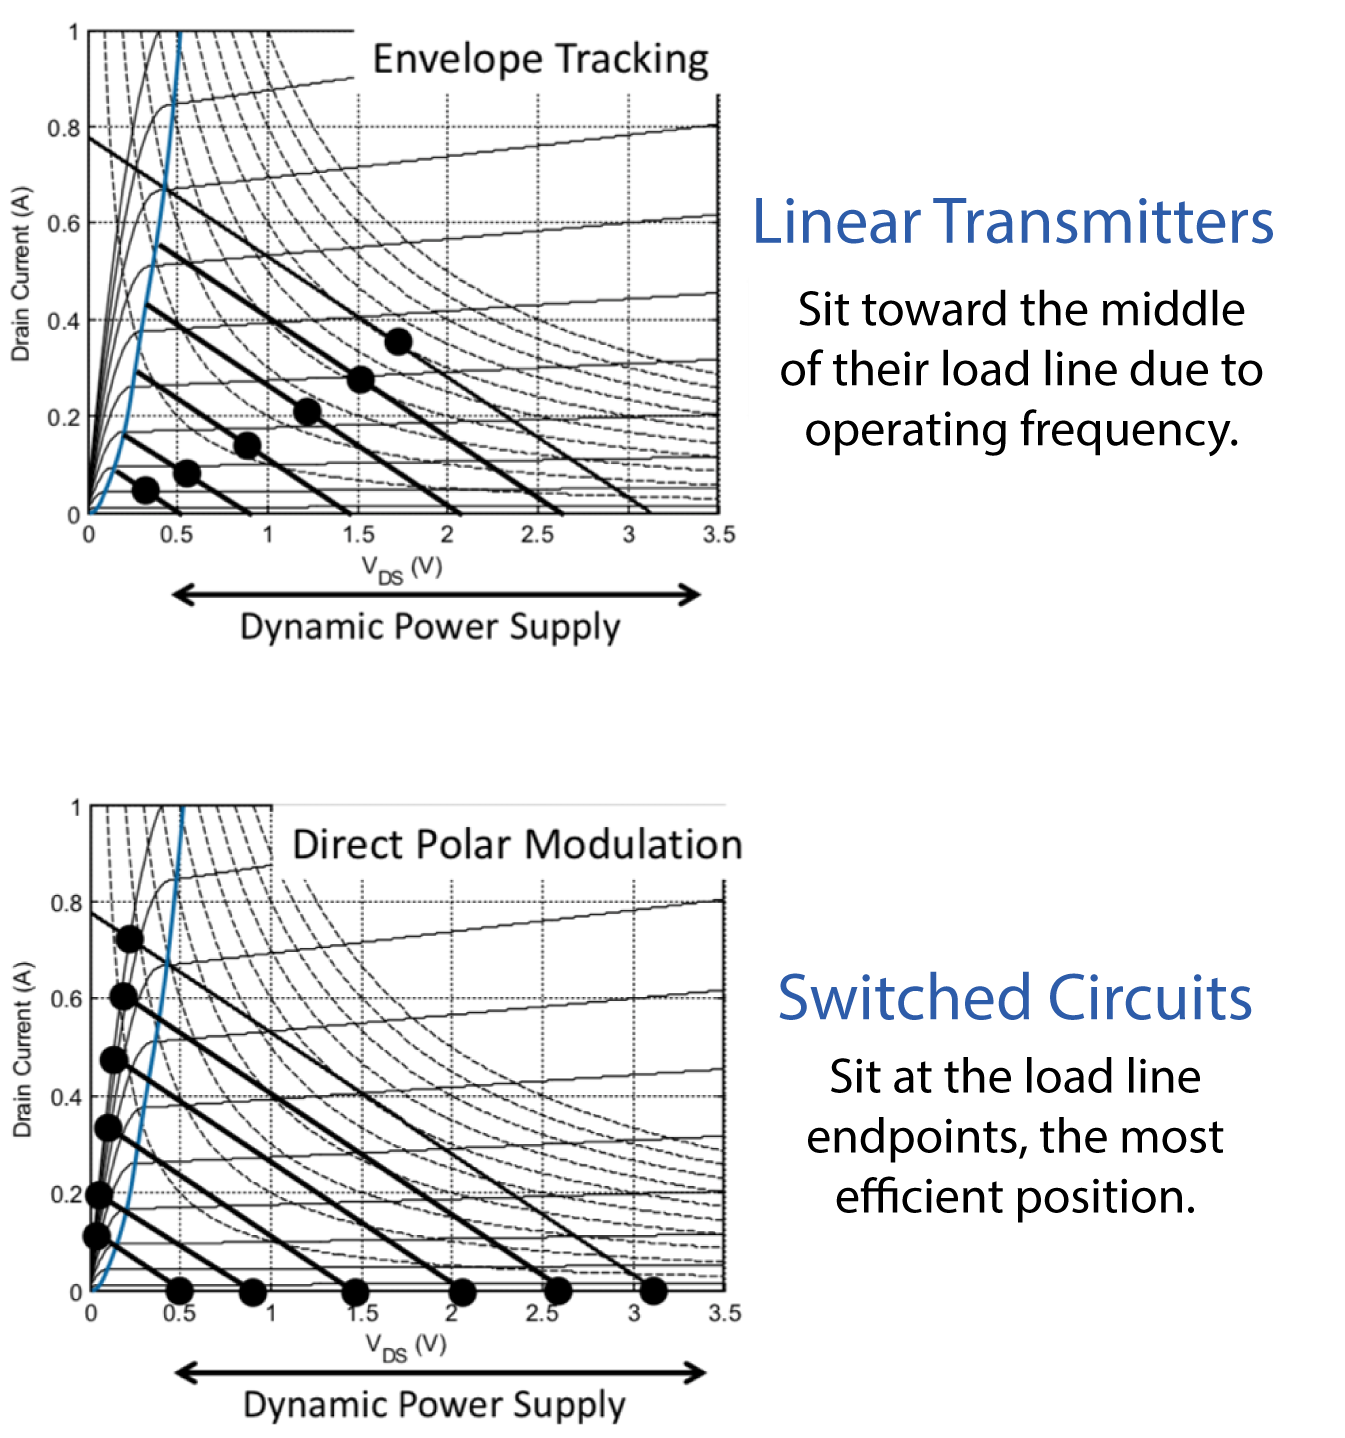 Comparing IV Curves between Linear Transmitters and Switched Circuits.